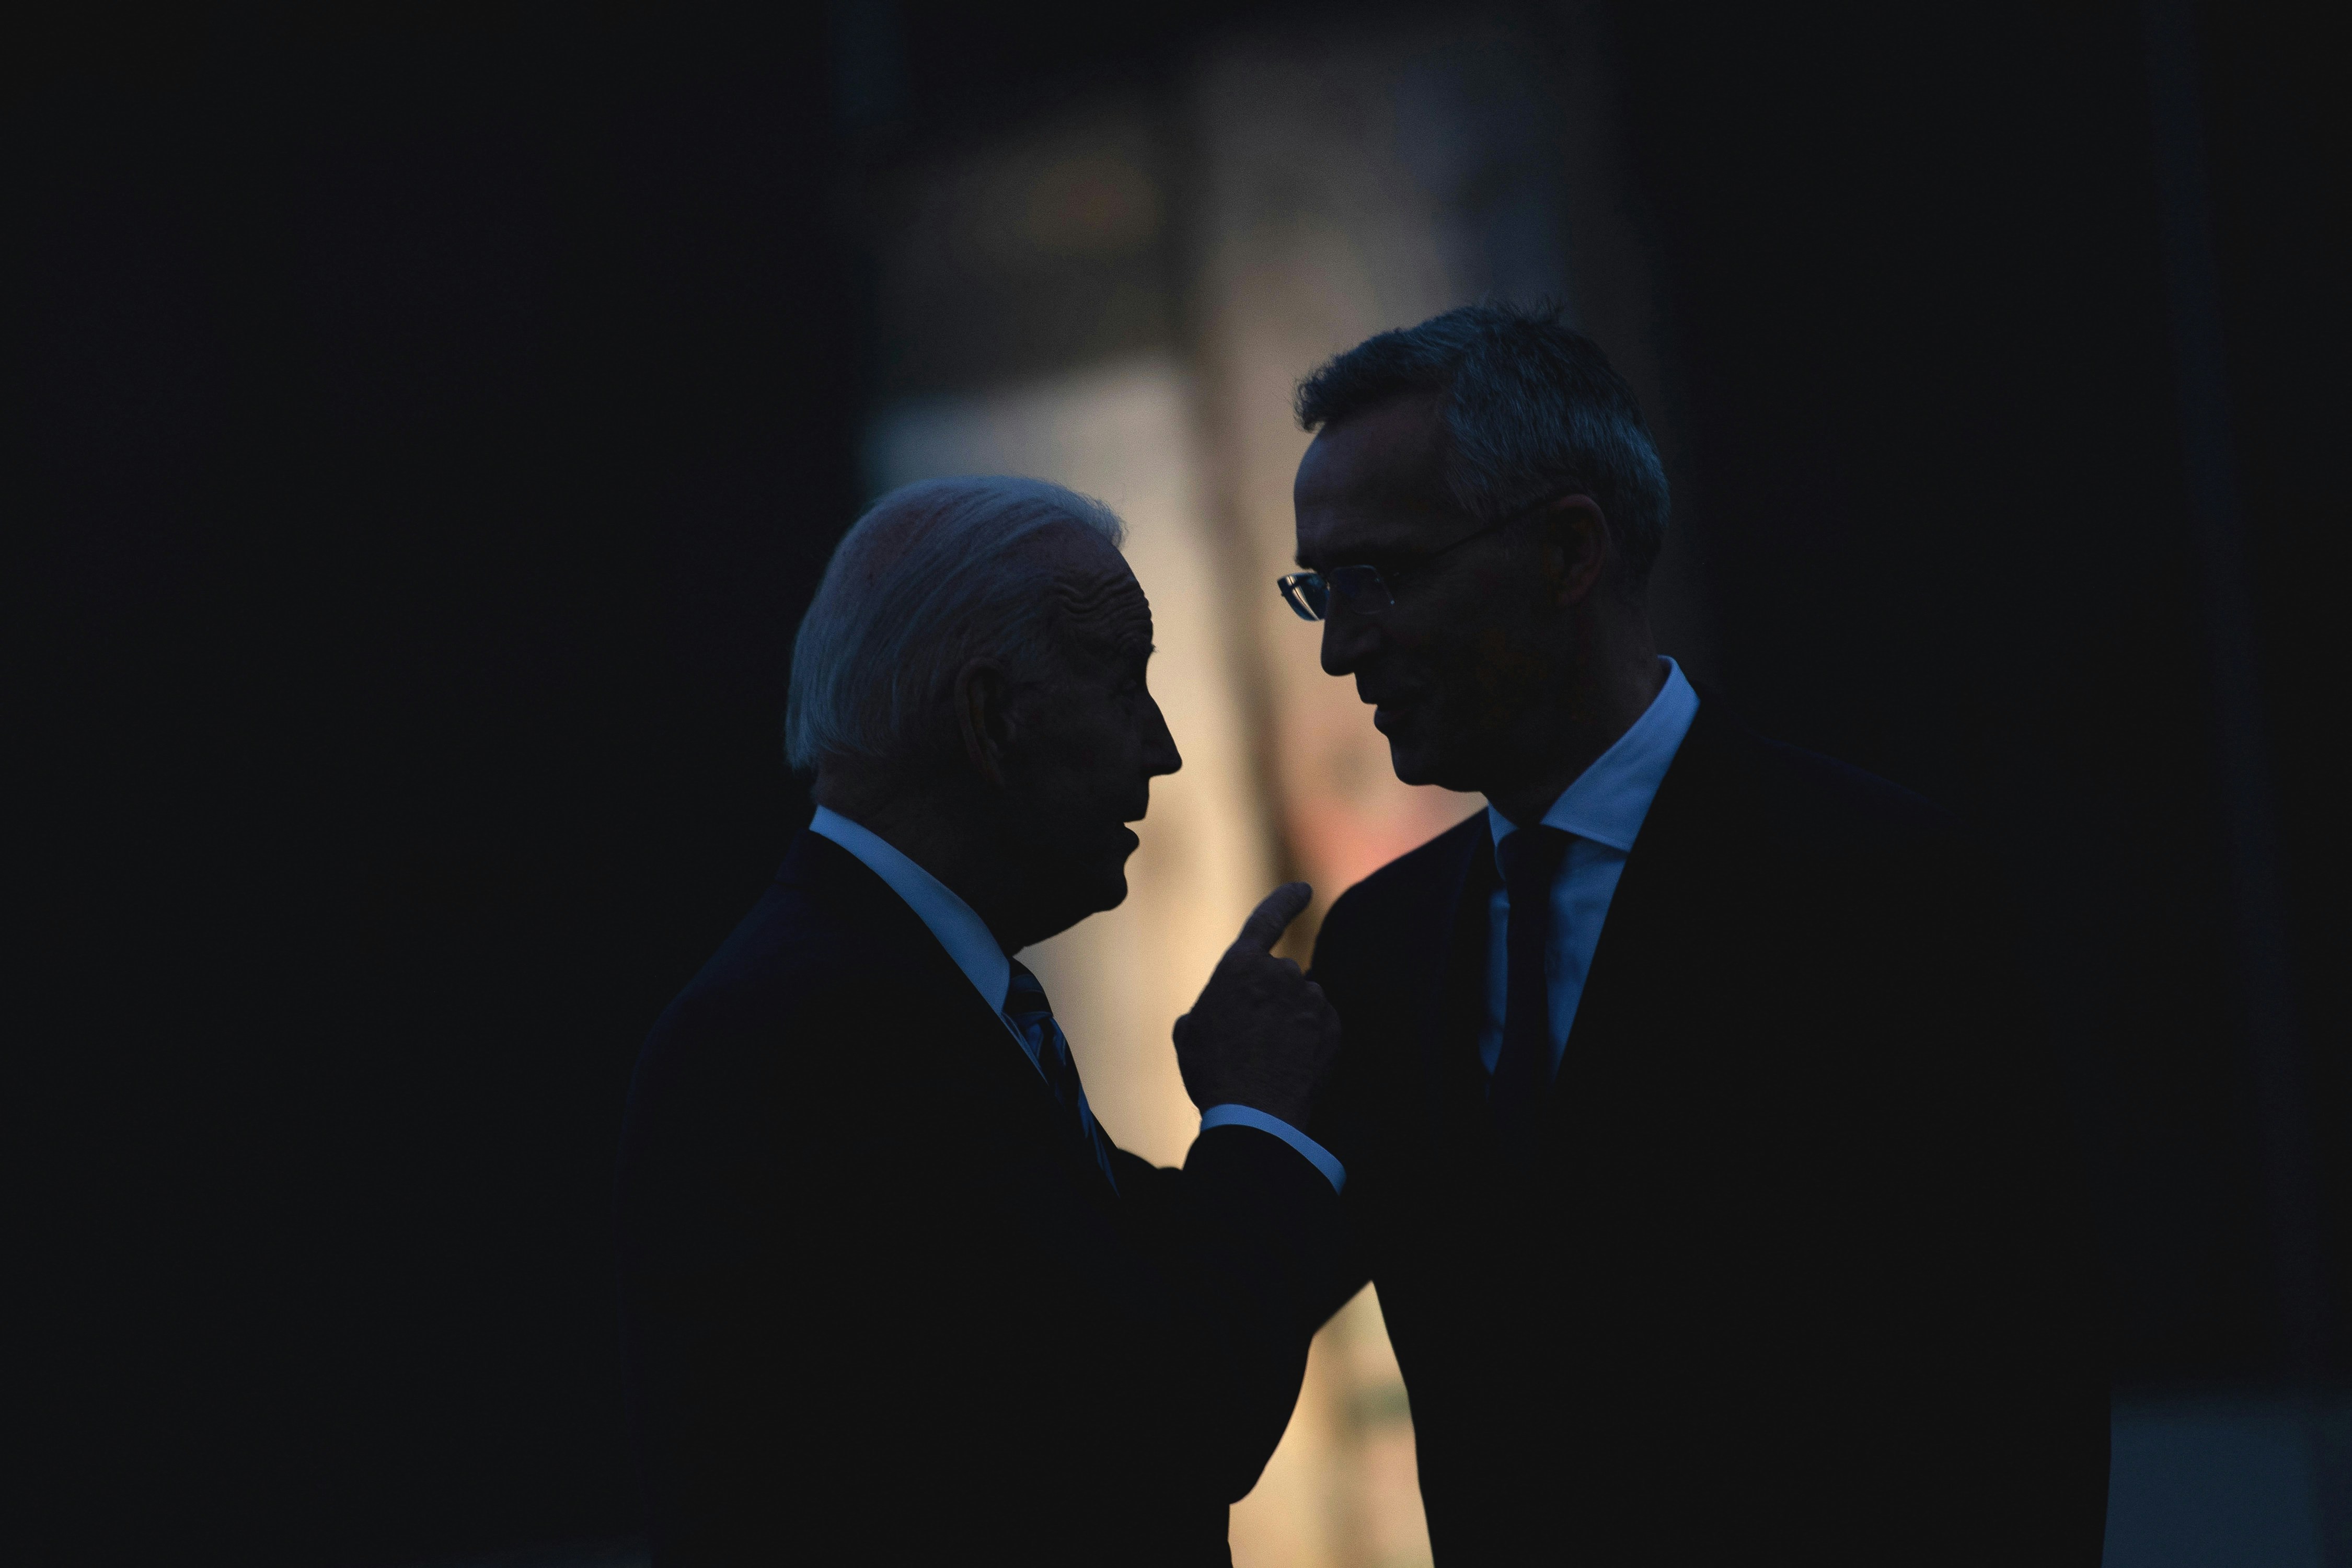 US President Joe Biden and NATO Secretary General Jens Stoltenberg (R) talk at a memorial for the September 11th terrorist attacks on the United States after a summit June 14, 2021, at NATO Headquarters in Brussels. (Photo by Brendan Smialowski / AFP) (Photo by BRENDAN SMIALOWSKI/AFP via Getty Images)